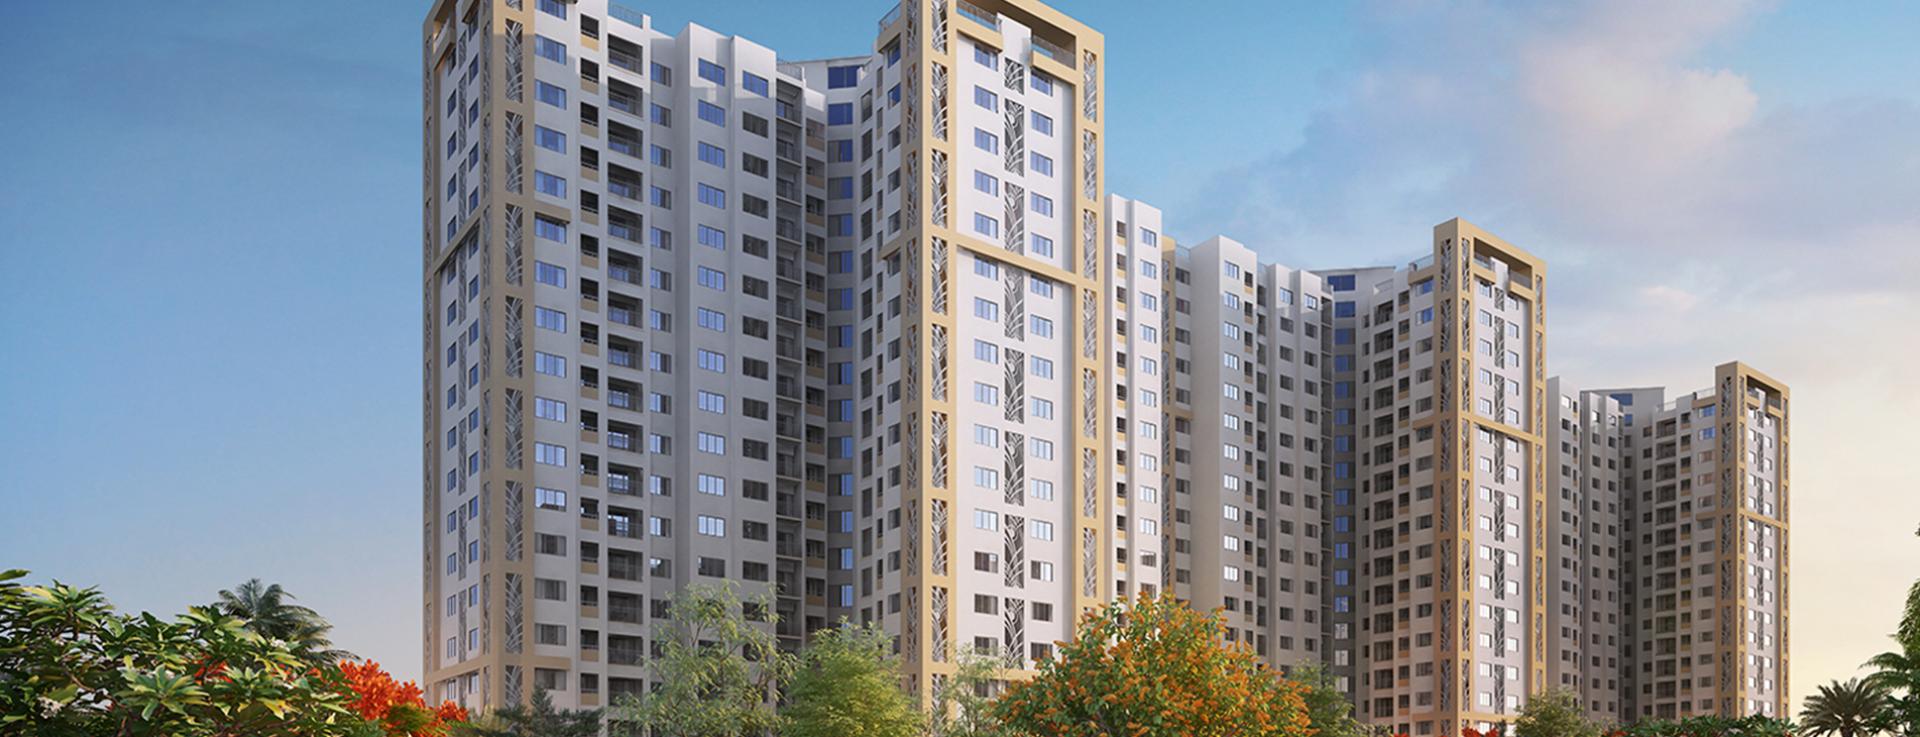 At Shriram Greenfield each residential unit is designed by international experts & engineered with excellence Update